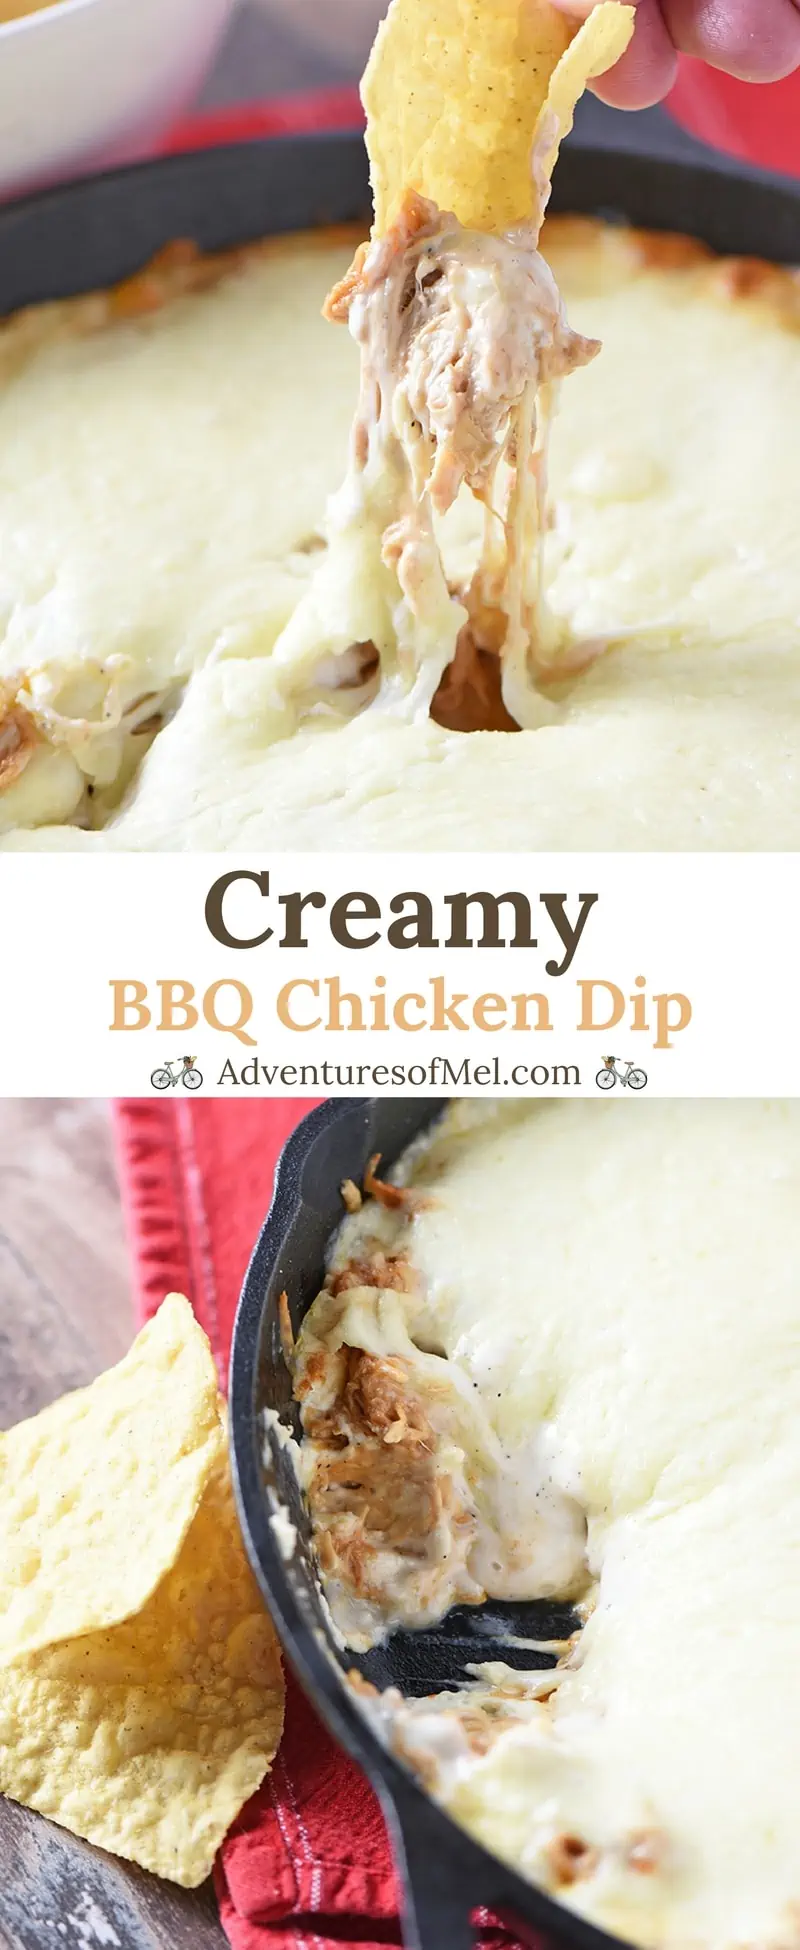 BBQ Chicken Dip, made with cream cheese, is an easy appetizer recipe. Pair it with tortilla chips for a delicious snack your friends and family will love!